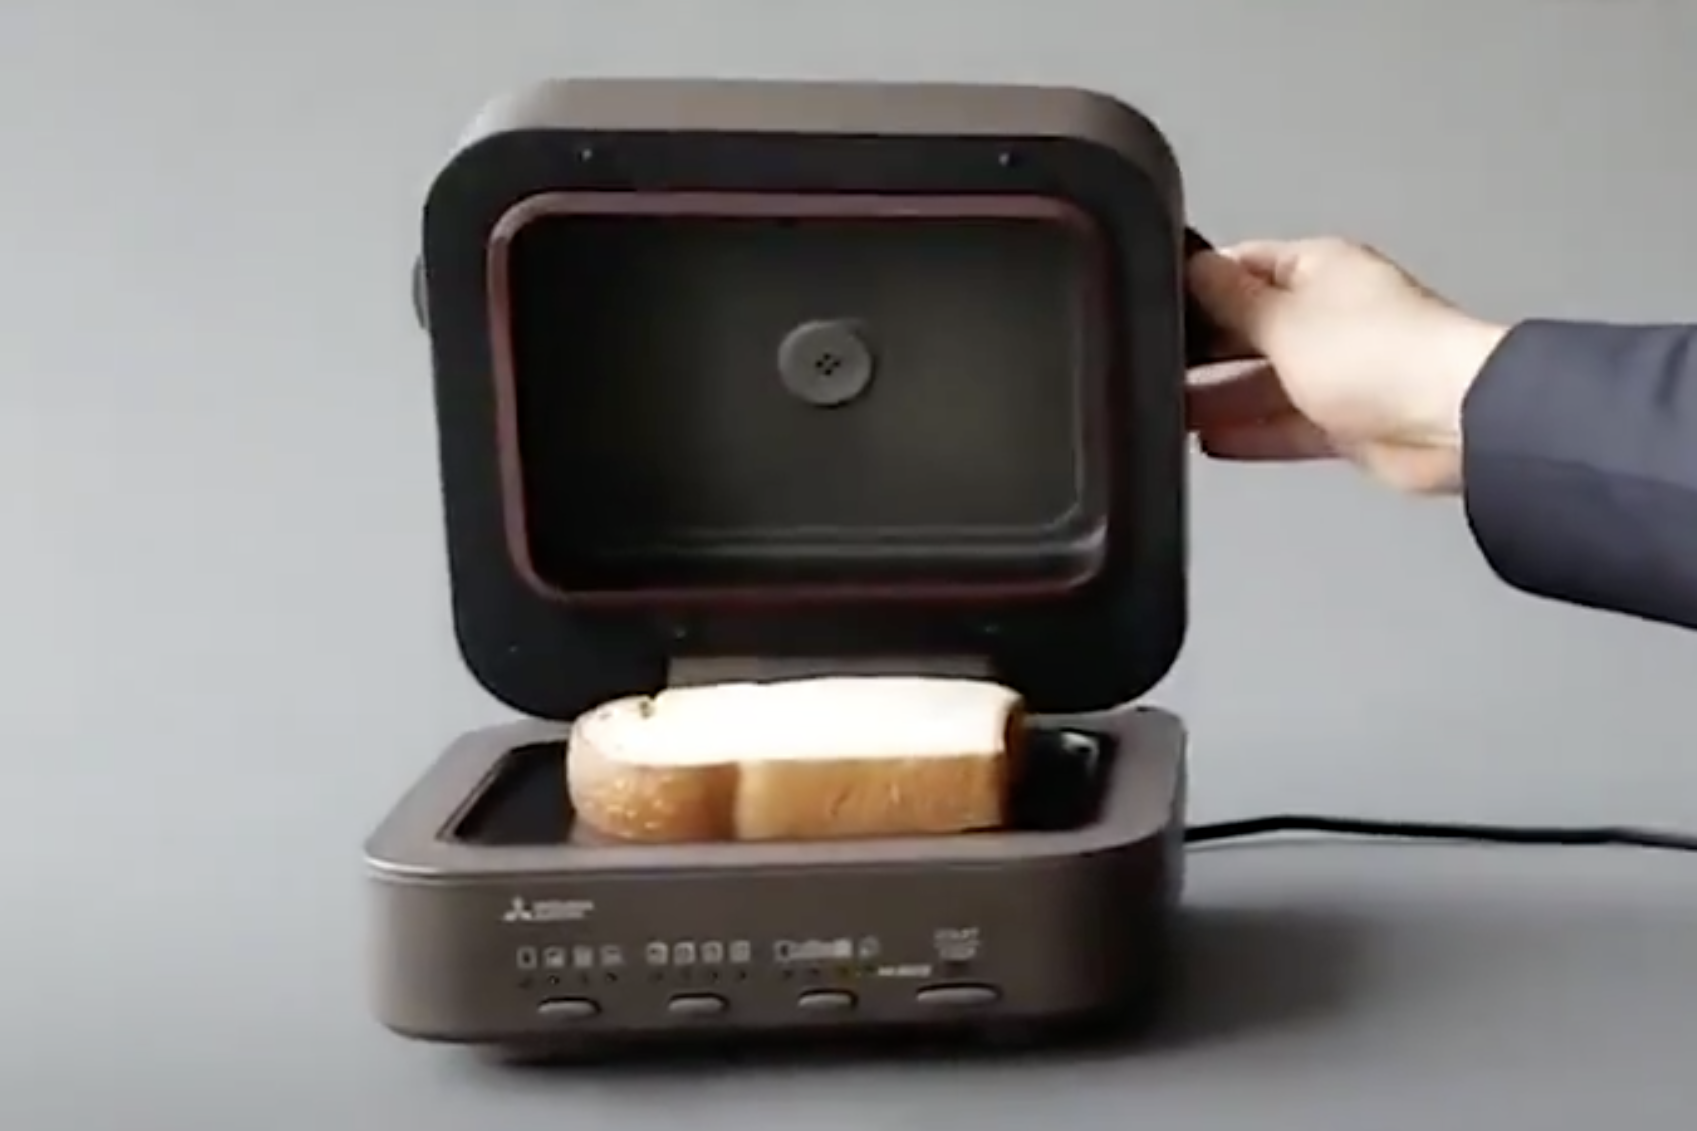 Mitsubishi Makes A $373 Toaster For Extreme Bread Enthusiasts